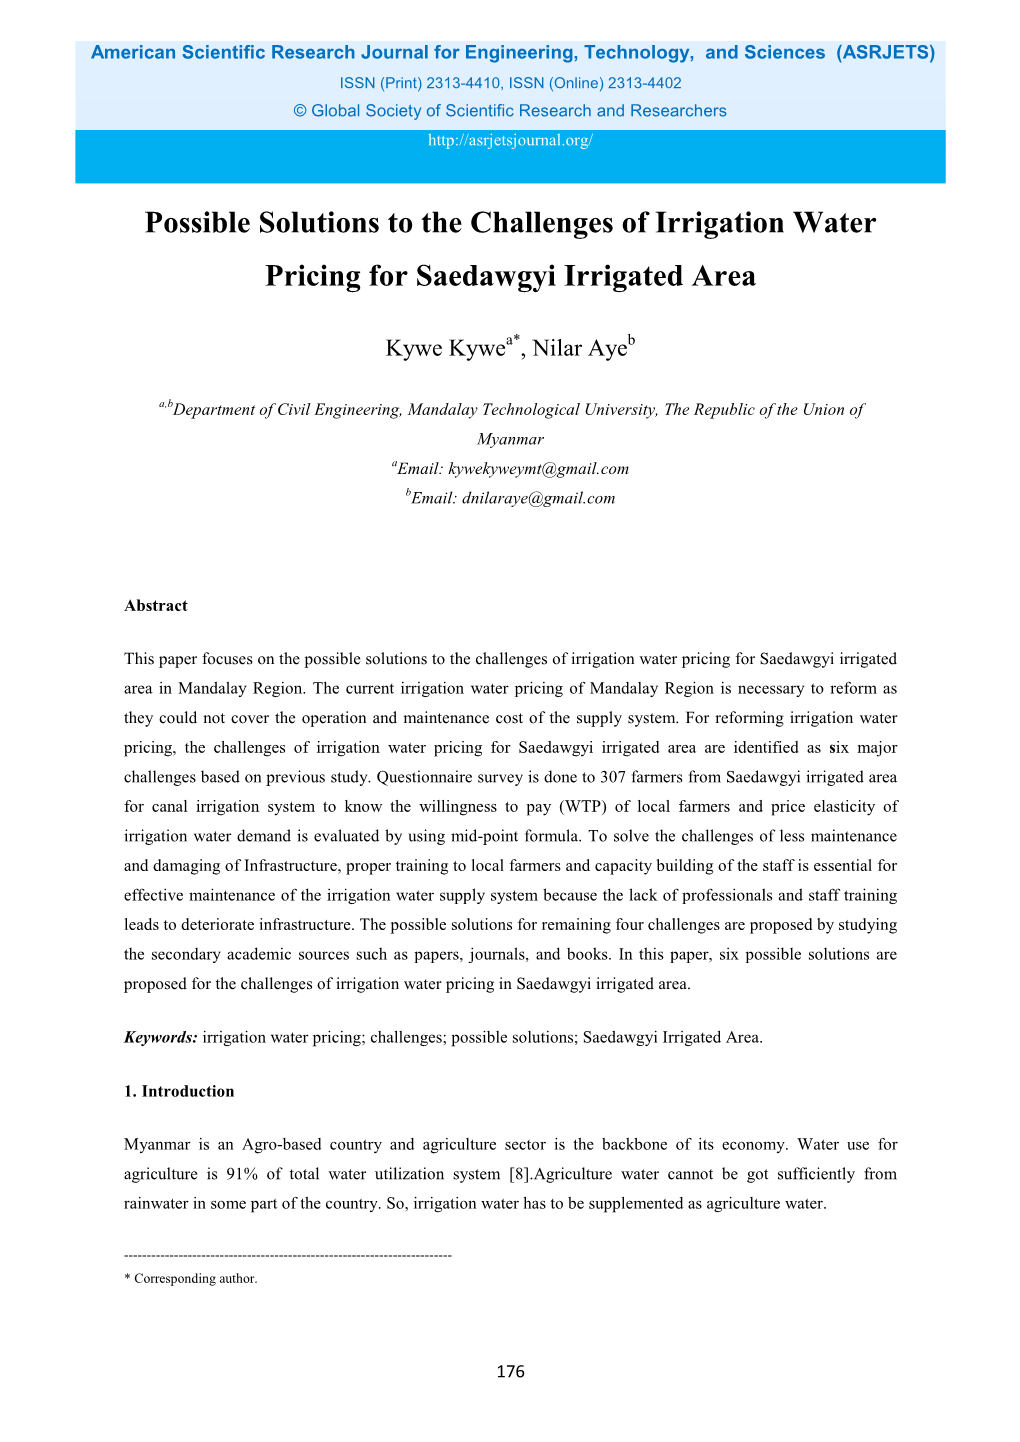 Possible Solutions to the Challenges of Irrigation Water Pricing for Saedawgyi Irrigated Area